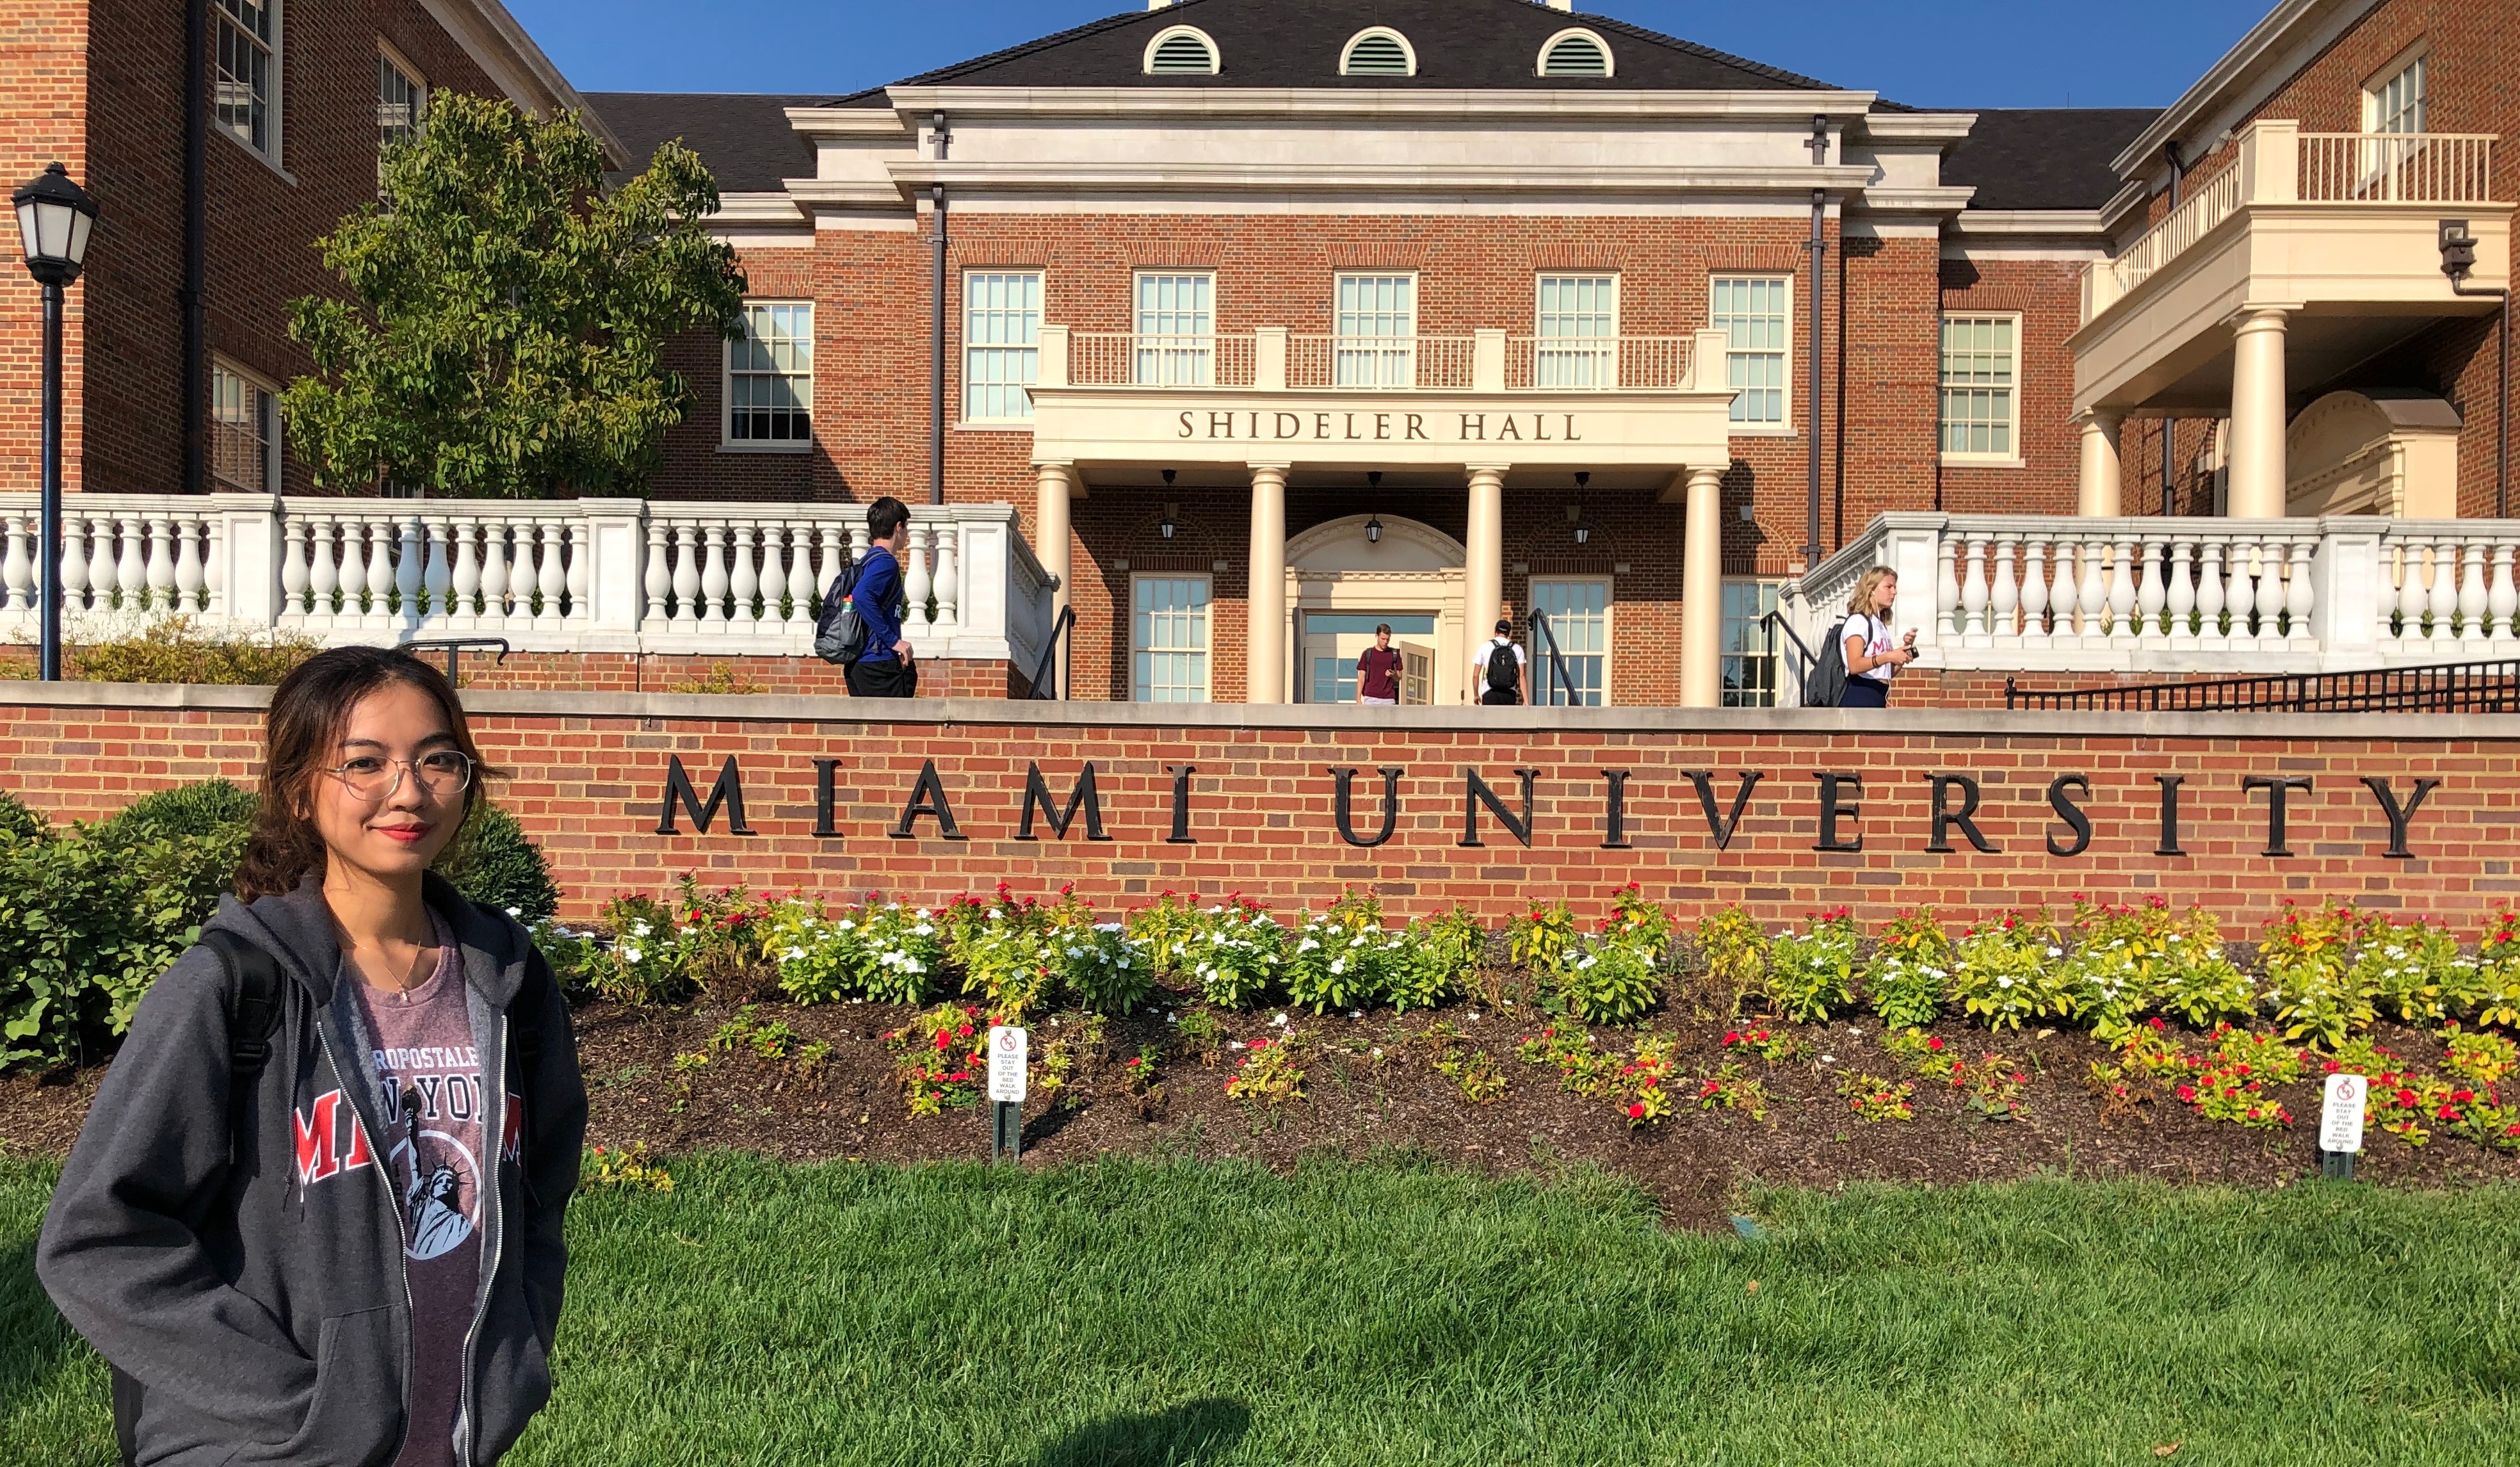 Megan poses in front of a Miami University sign